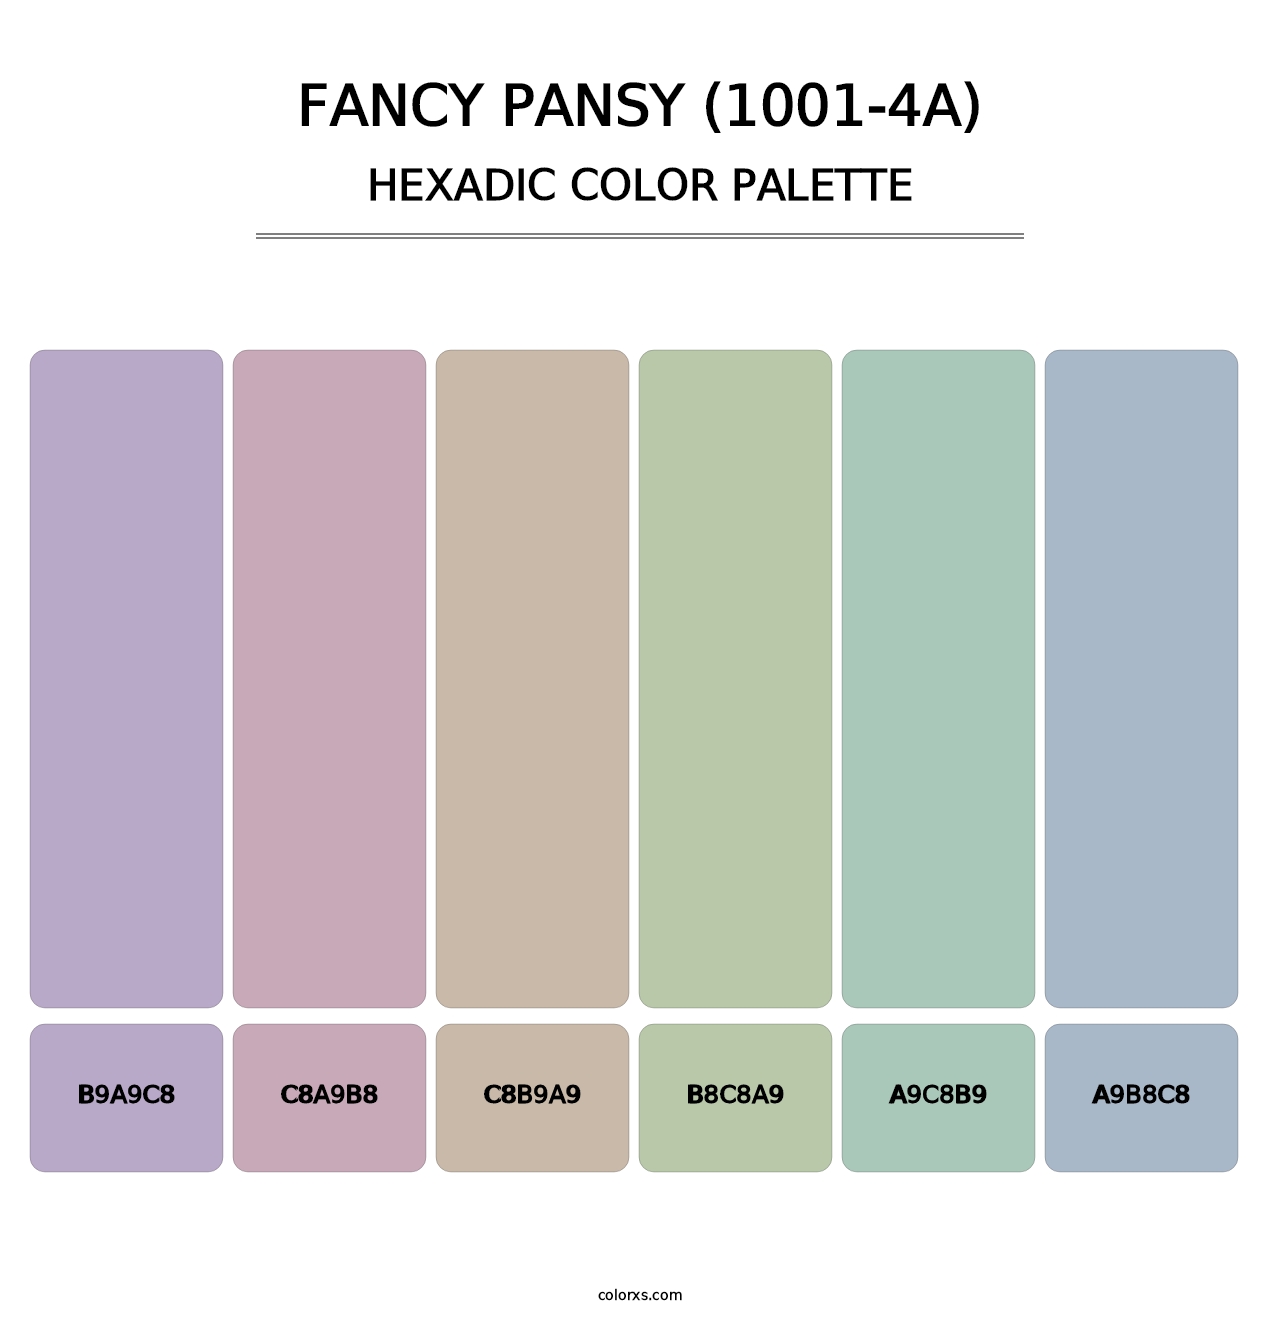 Fancy Pansy (1001-4A) - Hexadic Color Palette